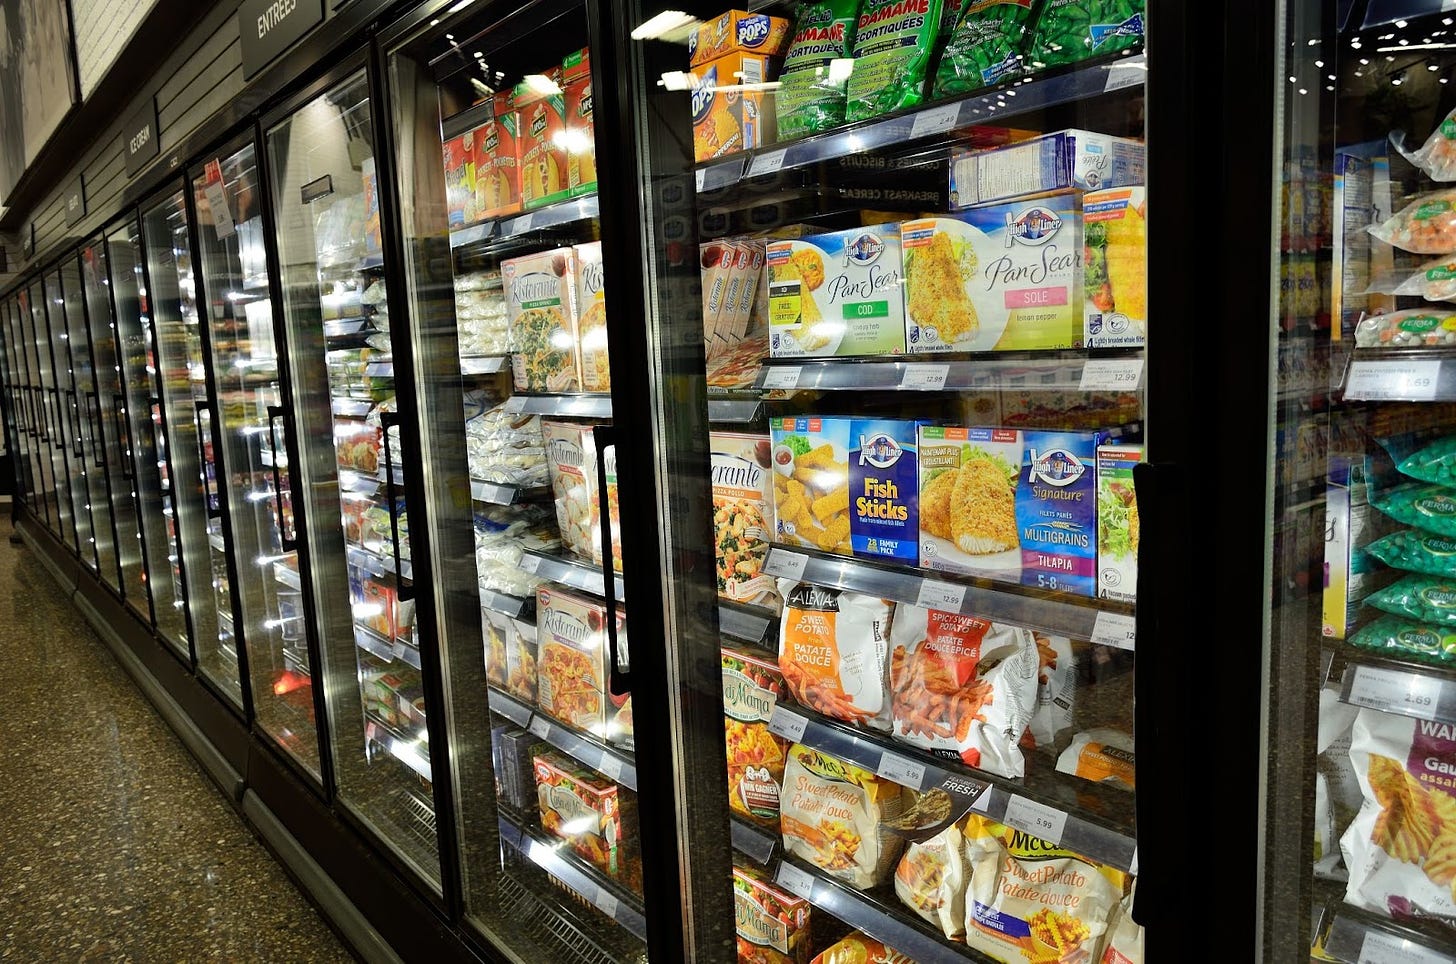 a close up of frozen food items in boxes in the grocery store aisle includes a blue box of fish sticks, sweet potato fries, peas and pizza